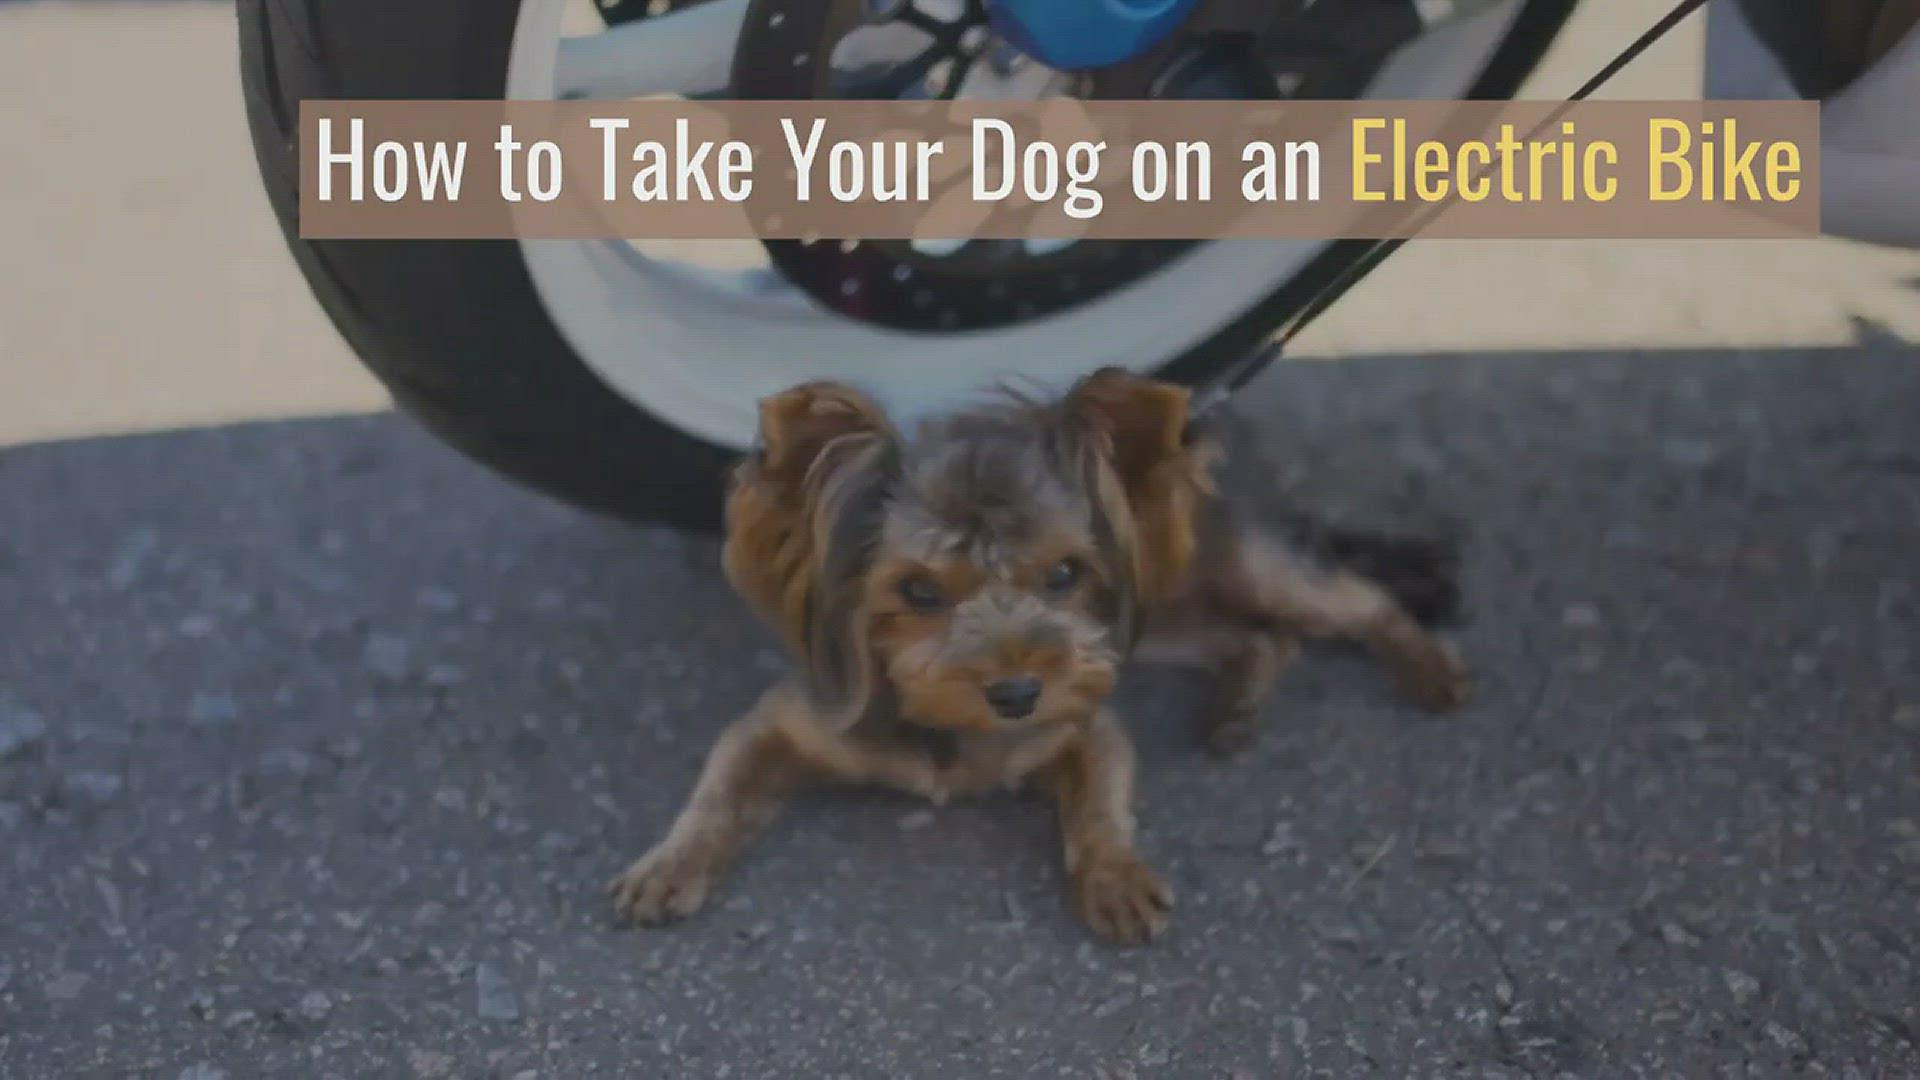 'Video thumbnail for How to Take Your Dog on an Electric Bike'